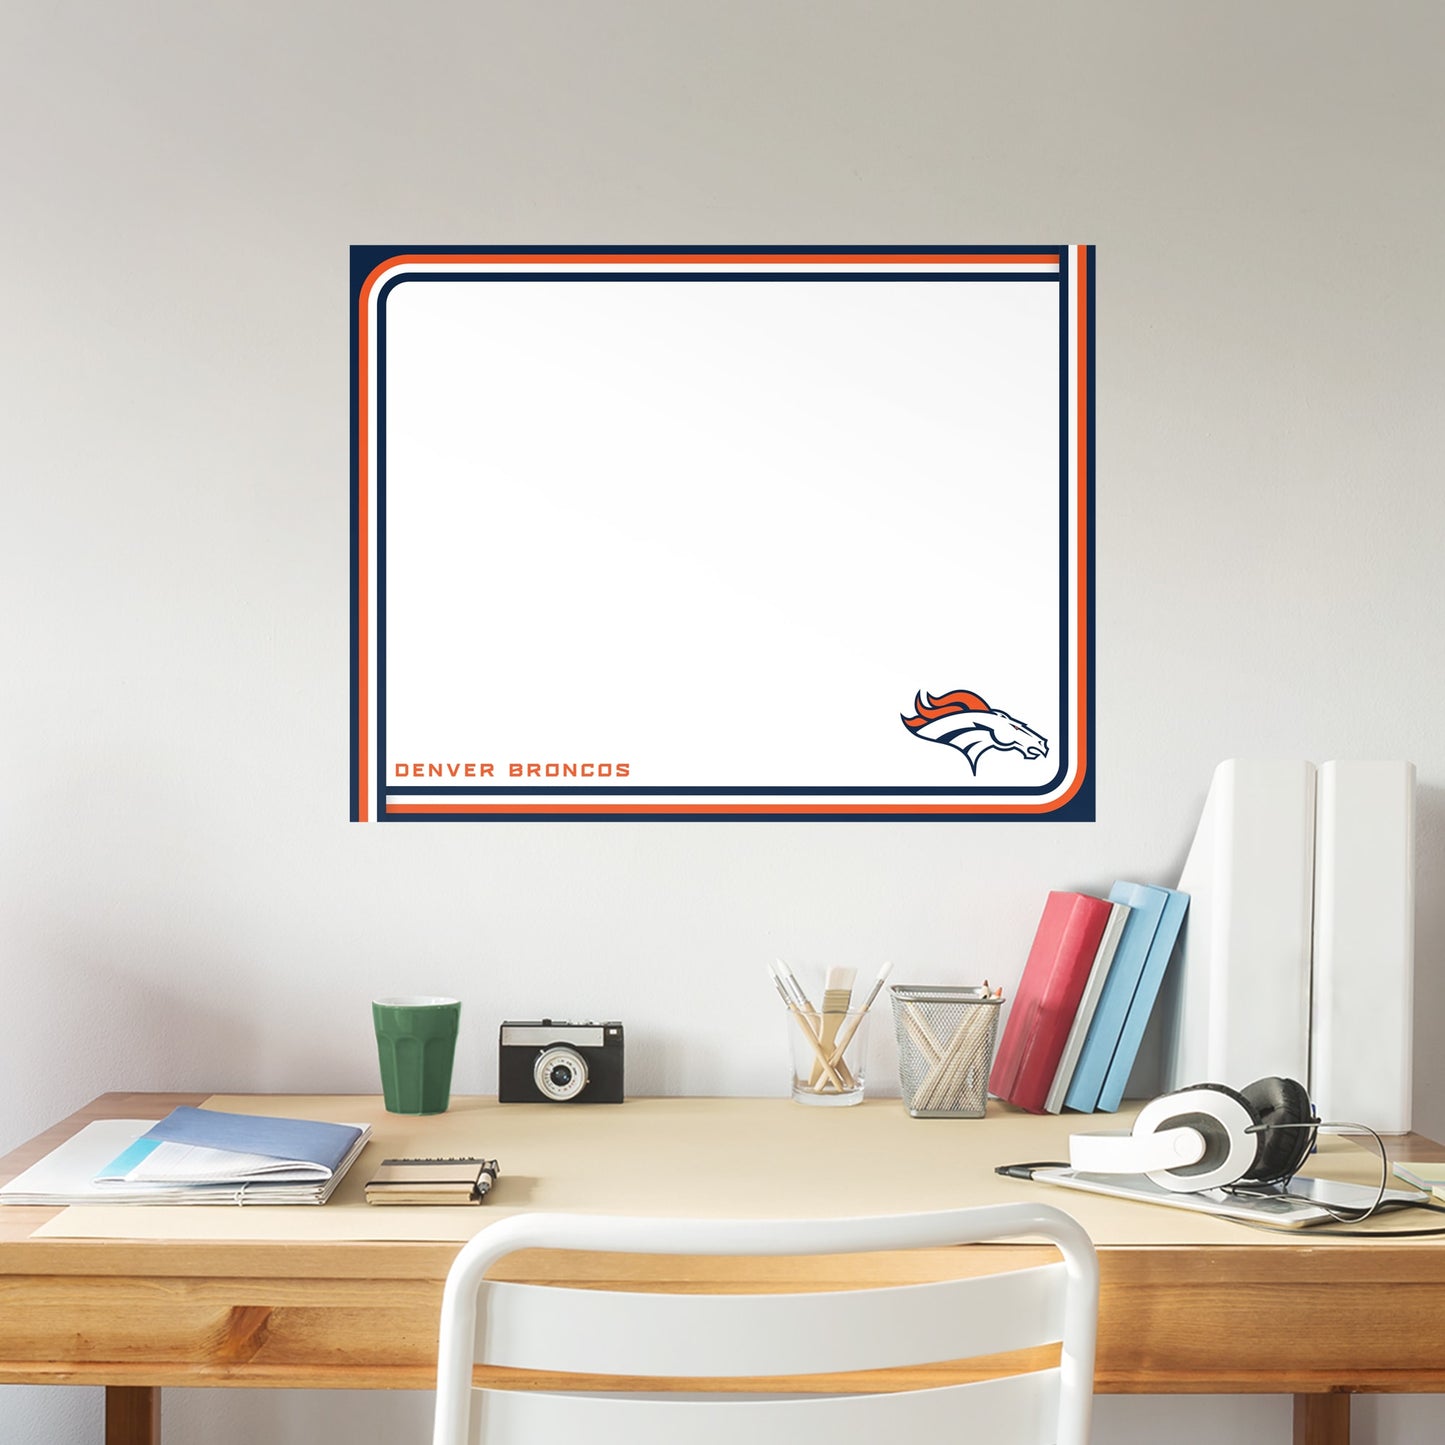 Denver Broncos:  Dry Erase Whiteboard        - Officially Licensed NFL Removable Wall   Adhesive Decal